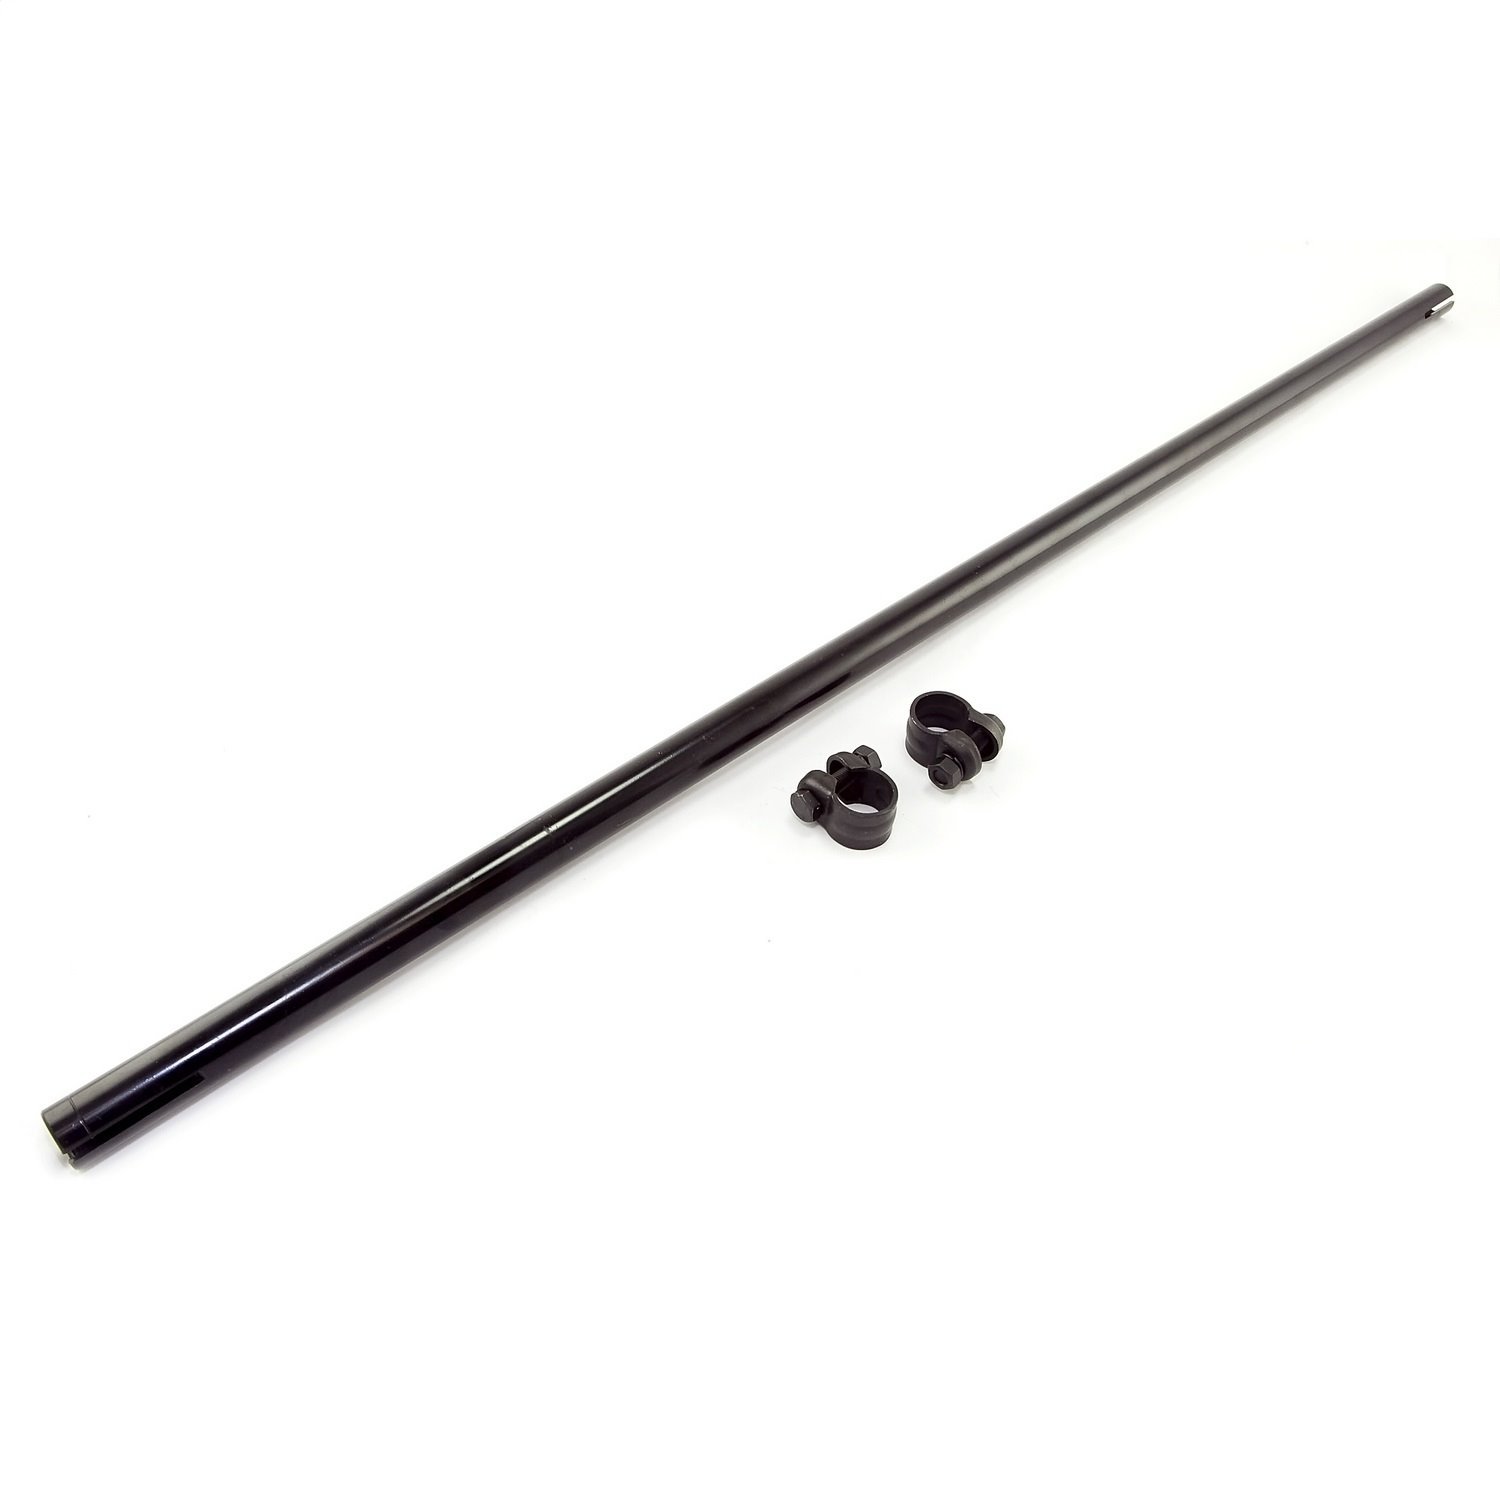 Stock replacement tie rod tube from Omix-ADA, Fits 84-90 Jeep Cherokee XJ and 86-90 MJ Comanches. Tie rod ends not included.